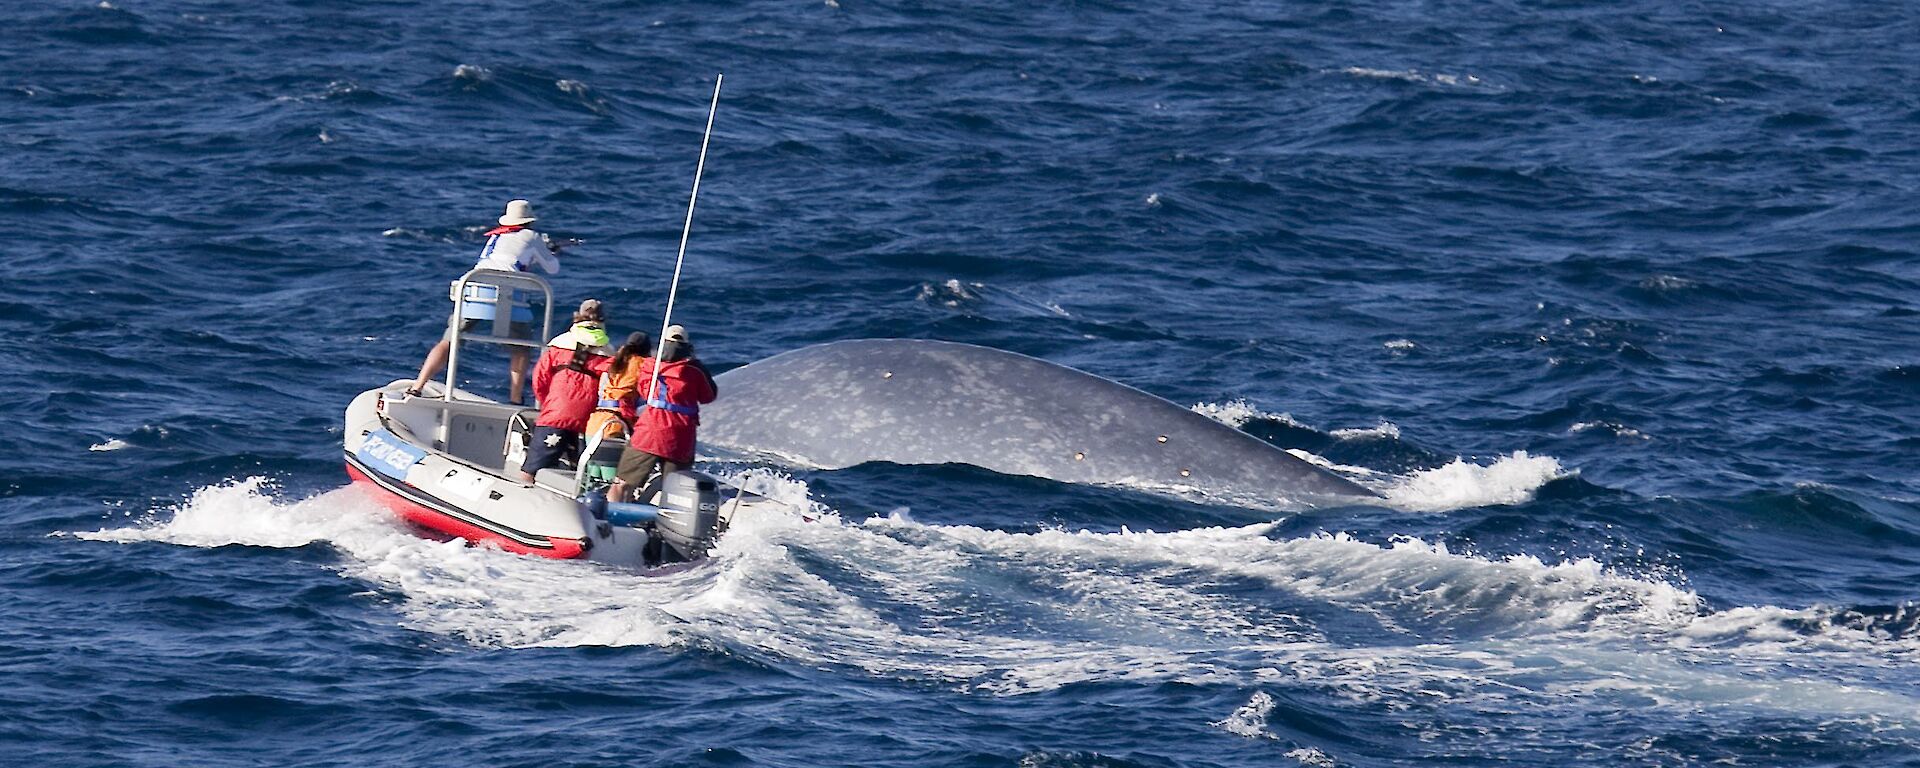 A pygmy blue whale being tagged by researchers in a small boat.